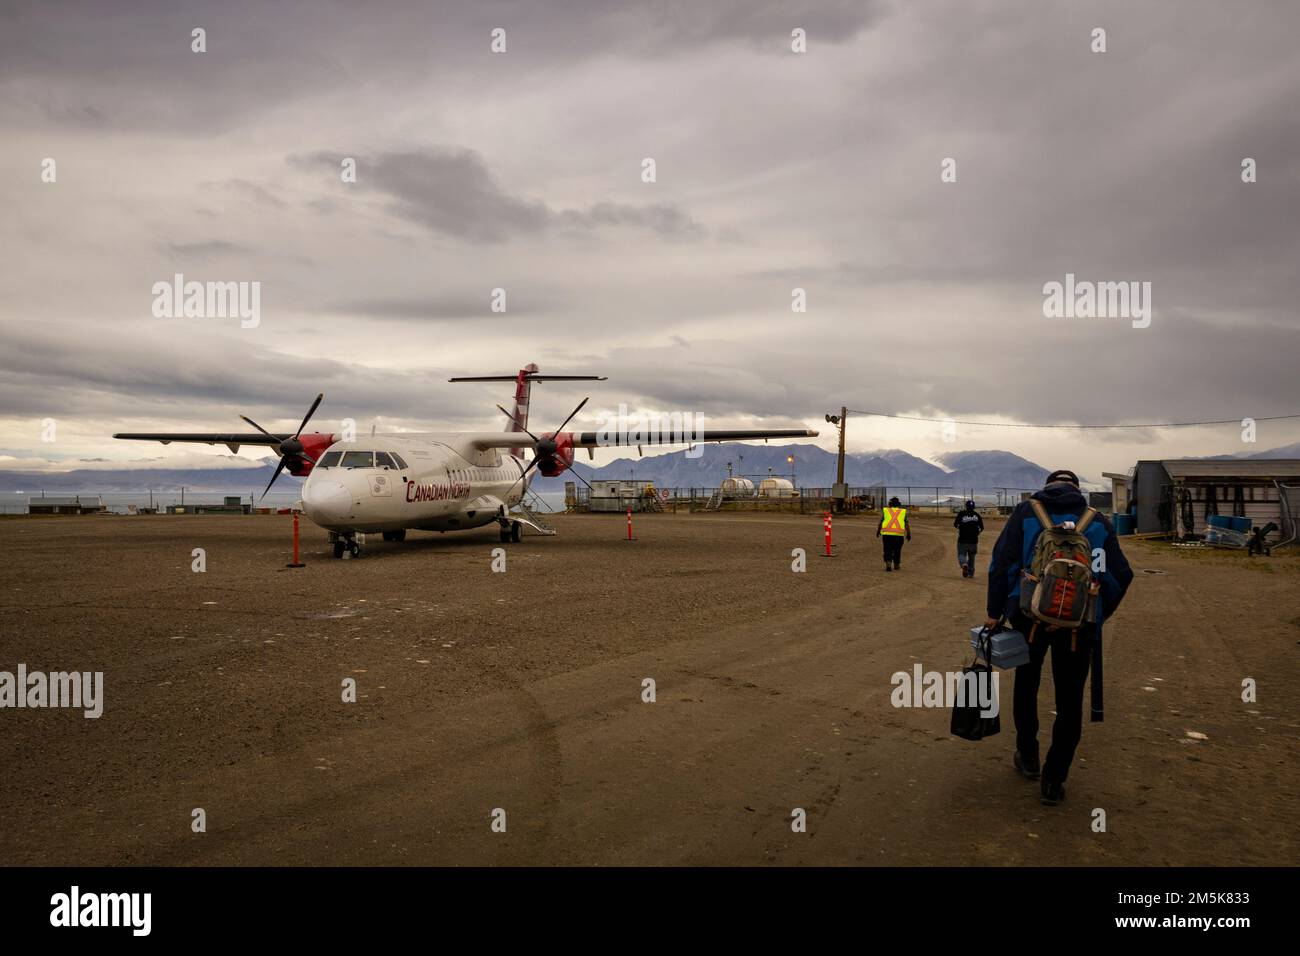 ATR 72 cargo and passenger aircraft belonging to Canadian North Airlines on the gravel airstrip at Pond Inlet, Baffin Island, Nunavut, Canada. Stock Photo